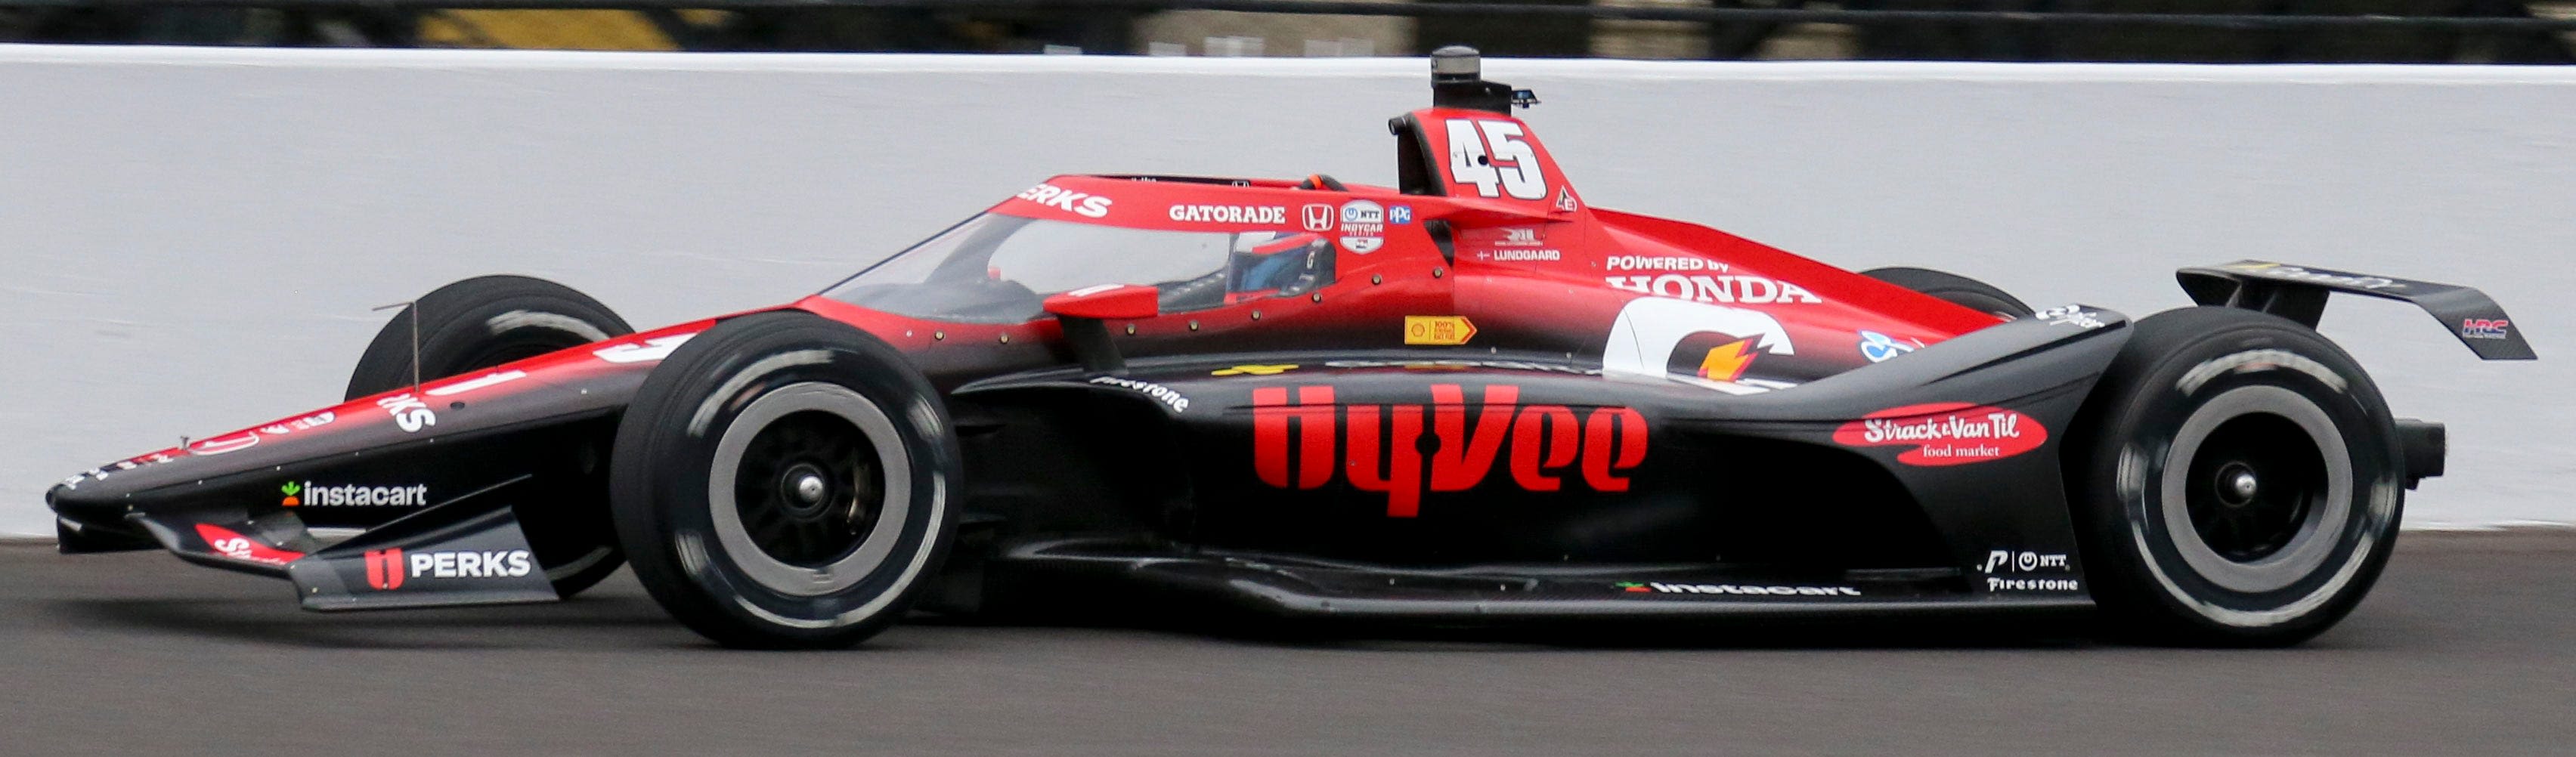 Hy-Vee expects IndyCar partnership during Indy 500 to fuel growth